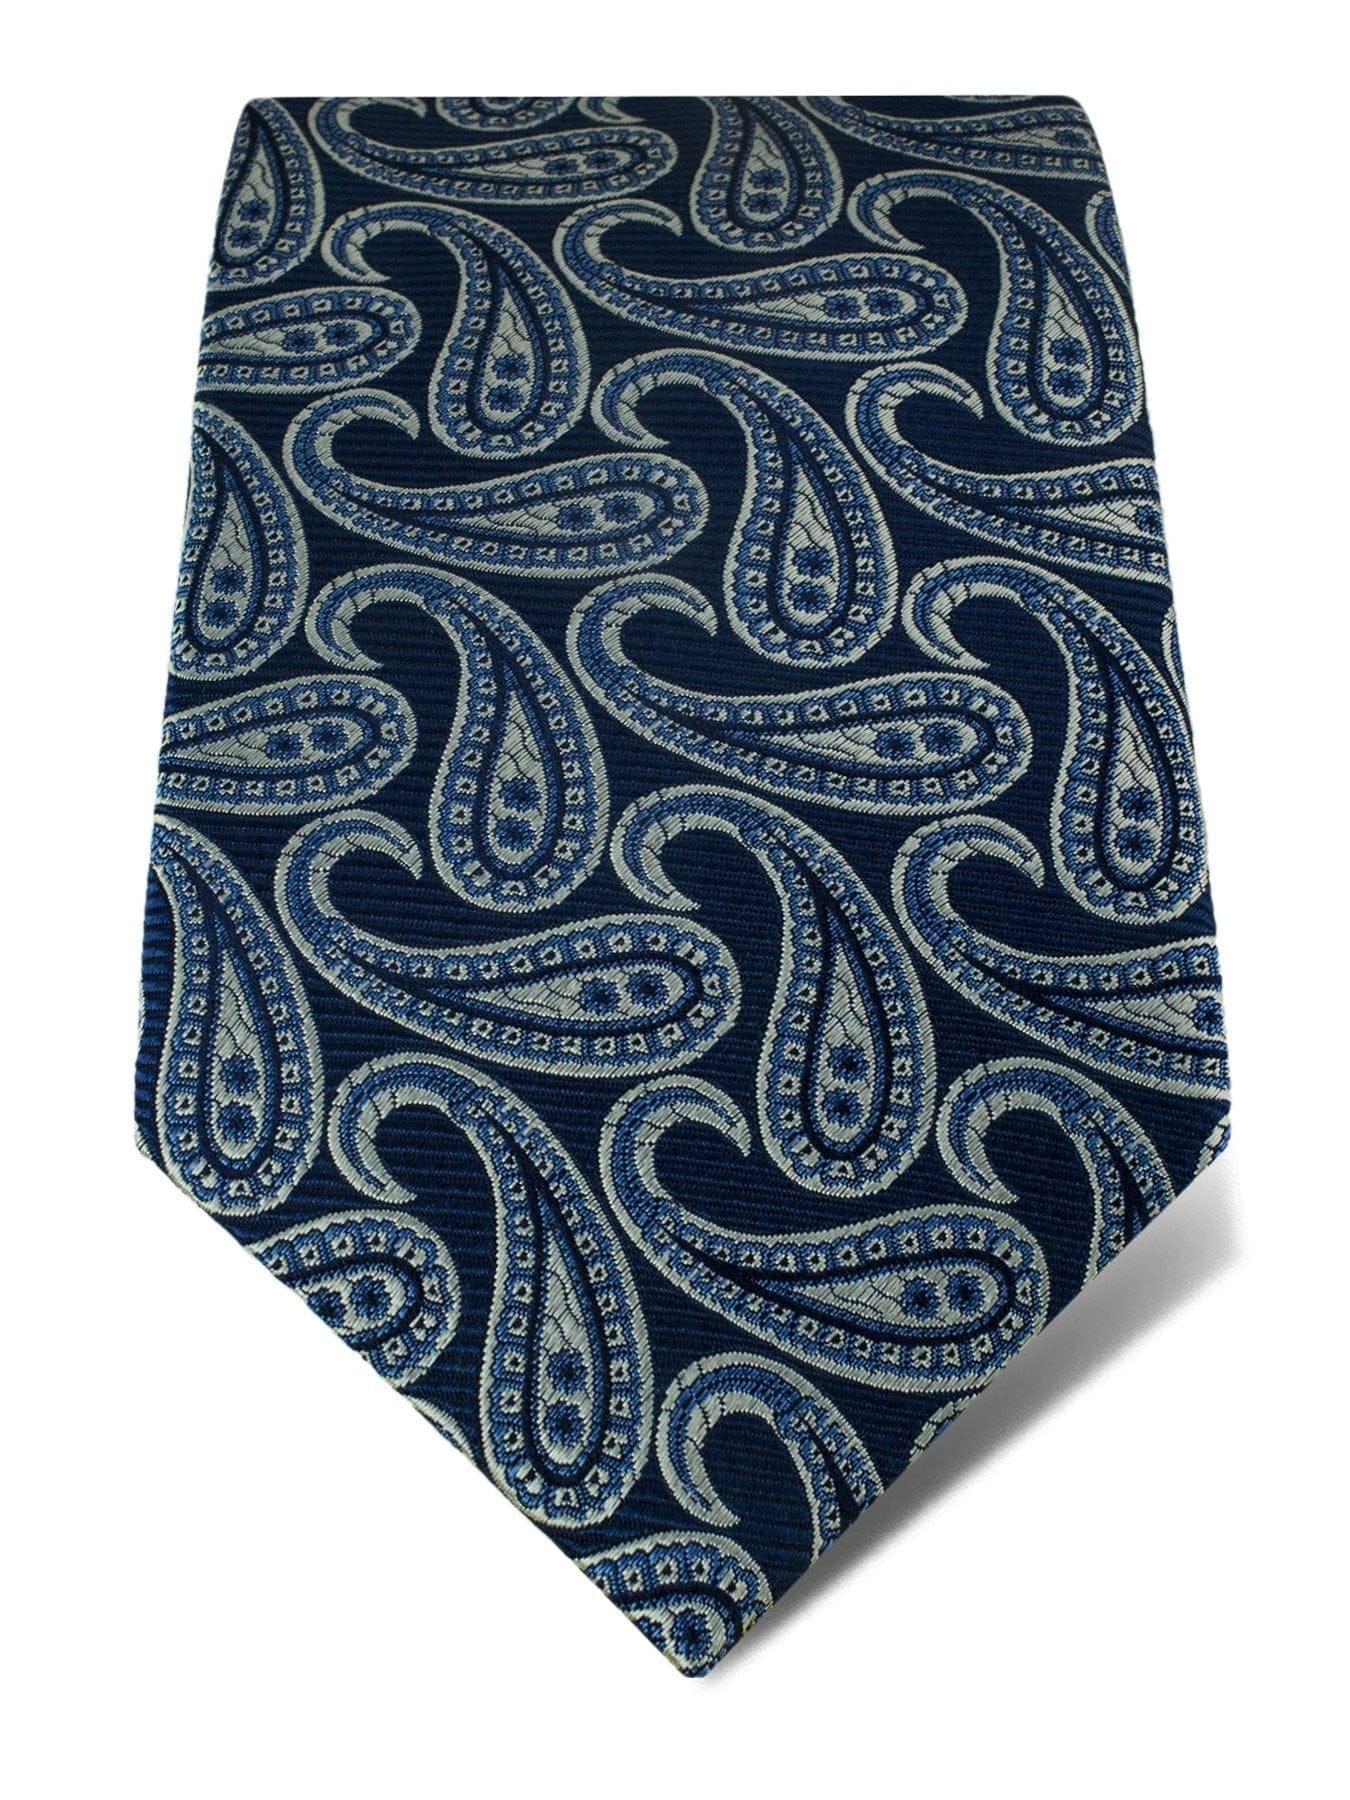 Navy Woven Silk Tie with White Large Paisley